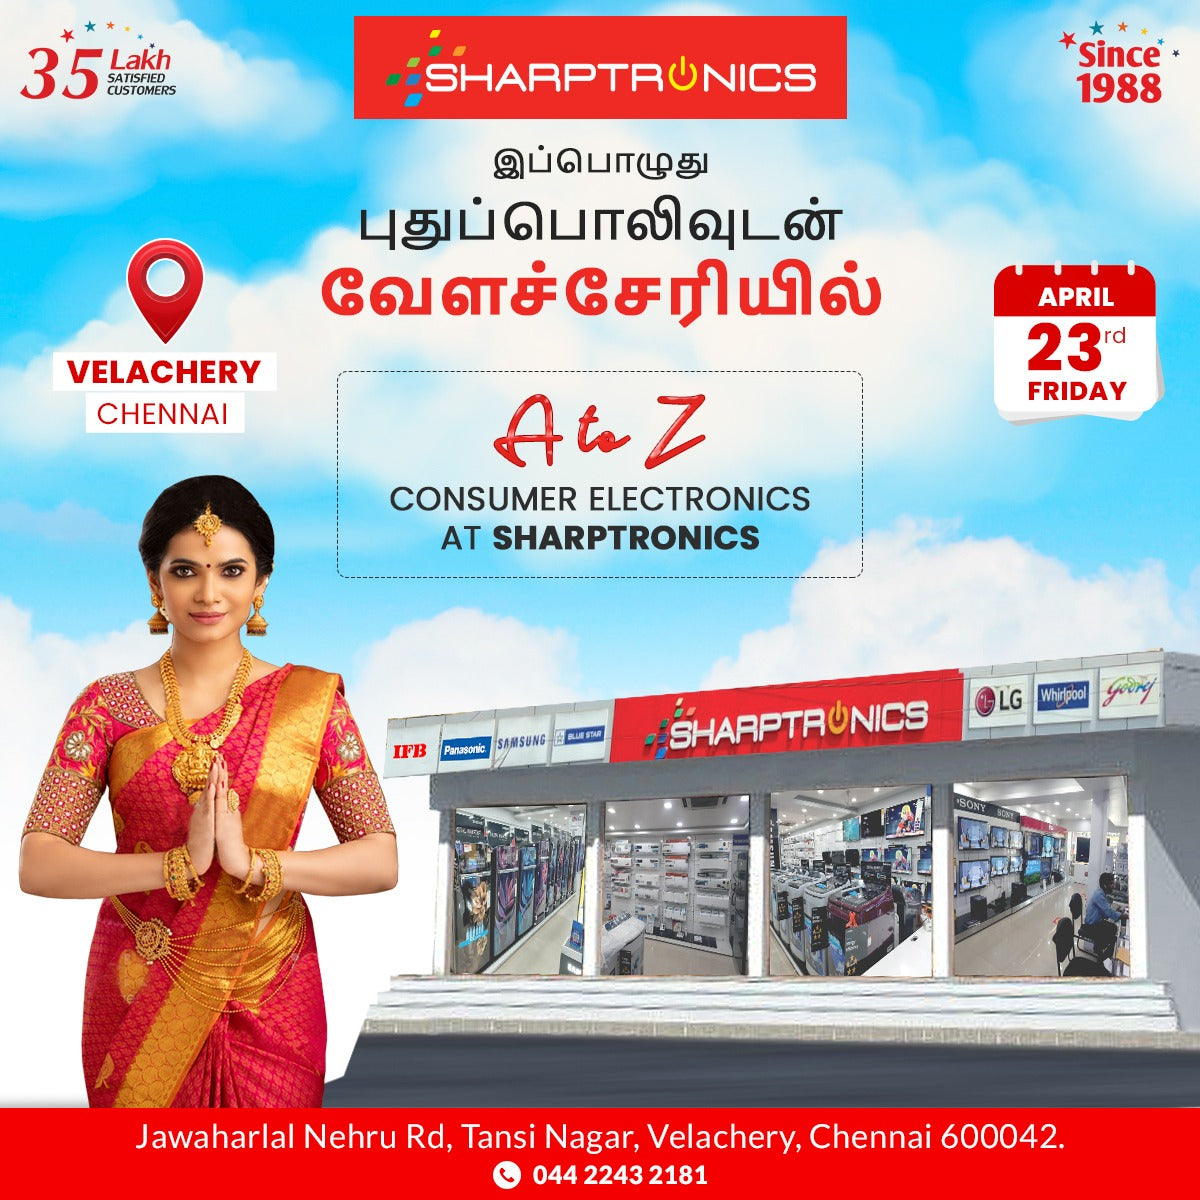 We are happy to relaunch the doors of our Velachery Sharptronics showroom to you